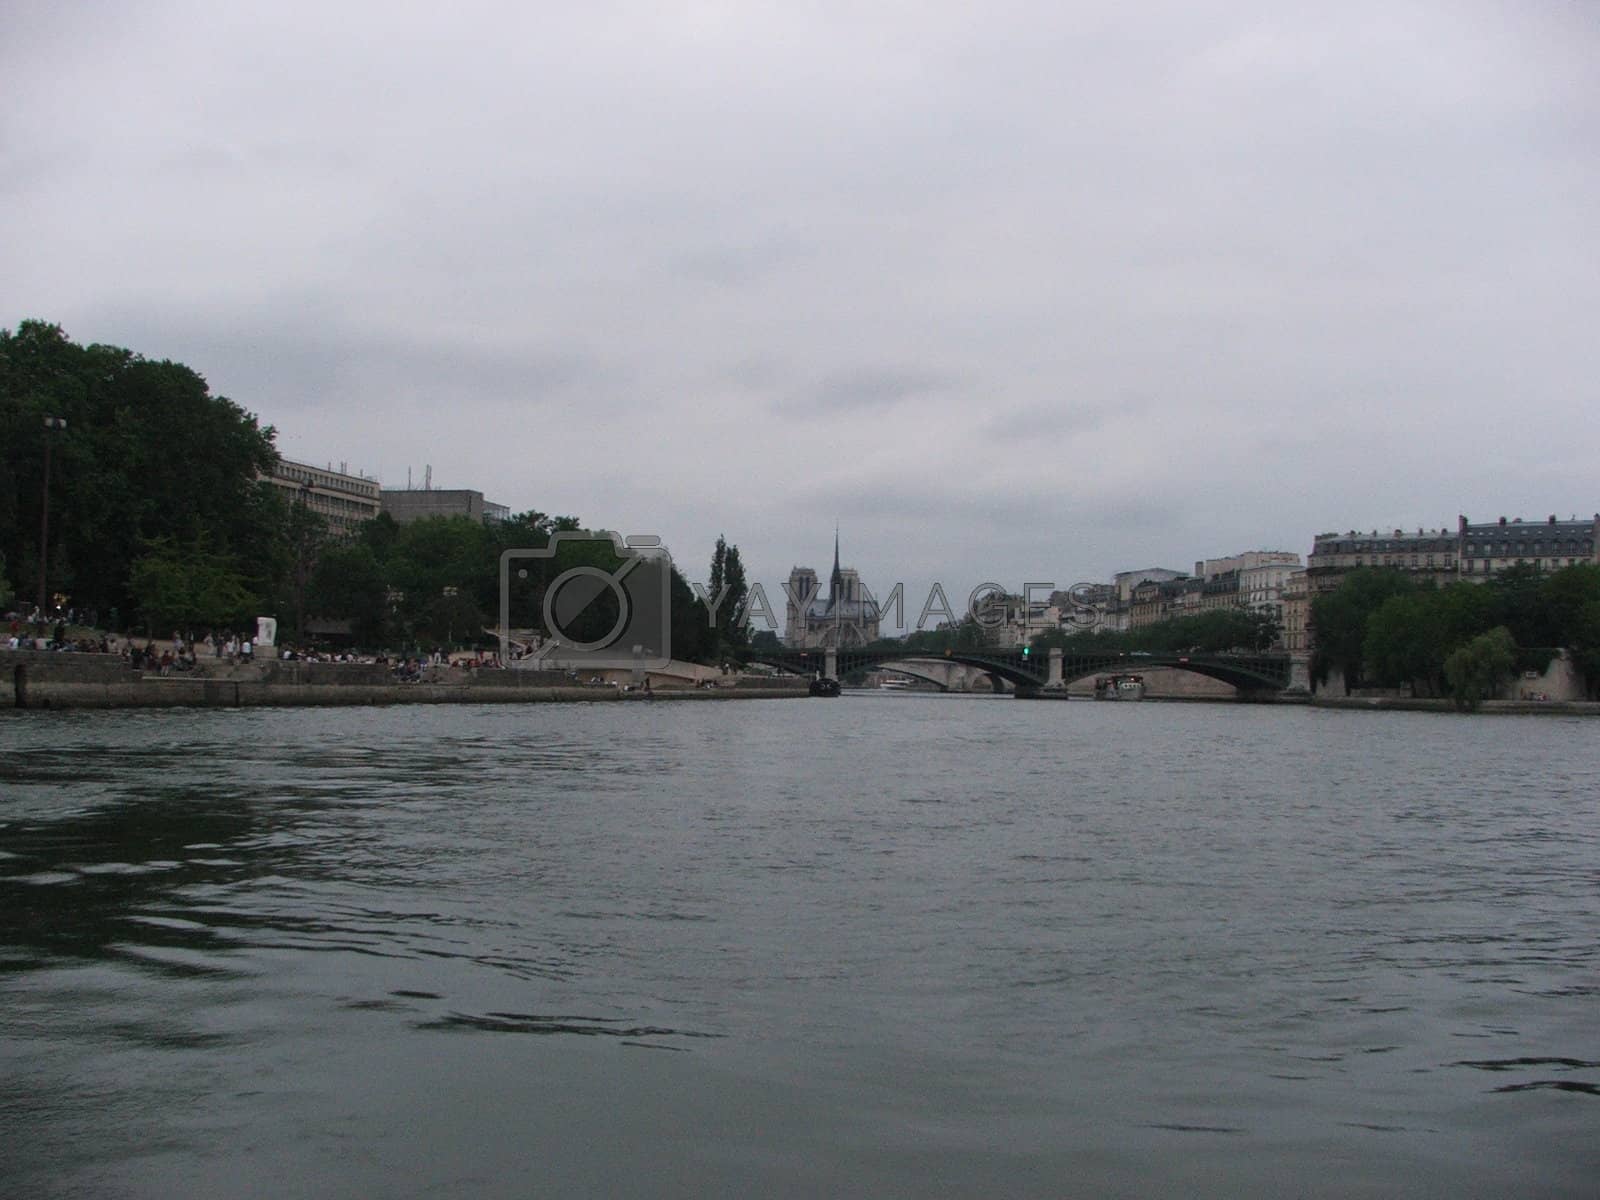 Royalty free image of Seine river in Paris by elgor